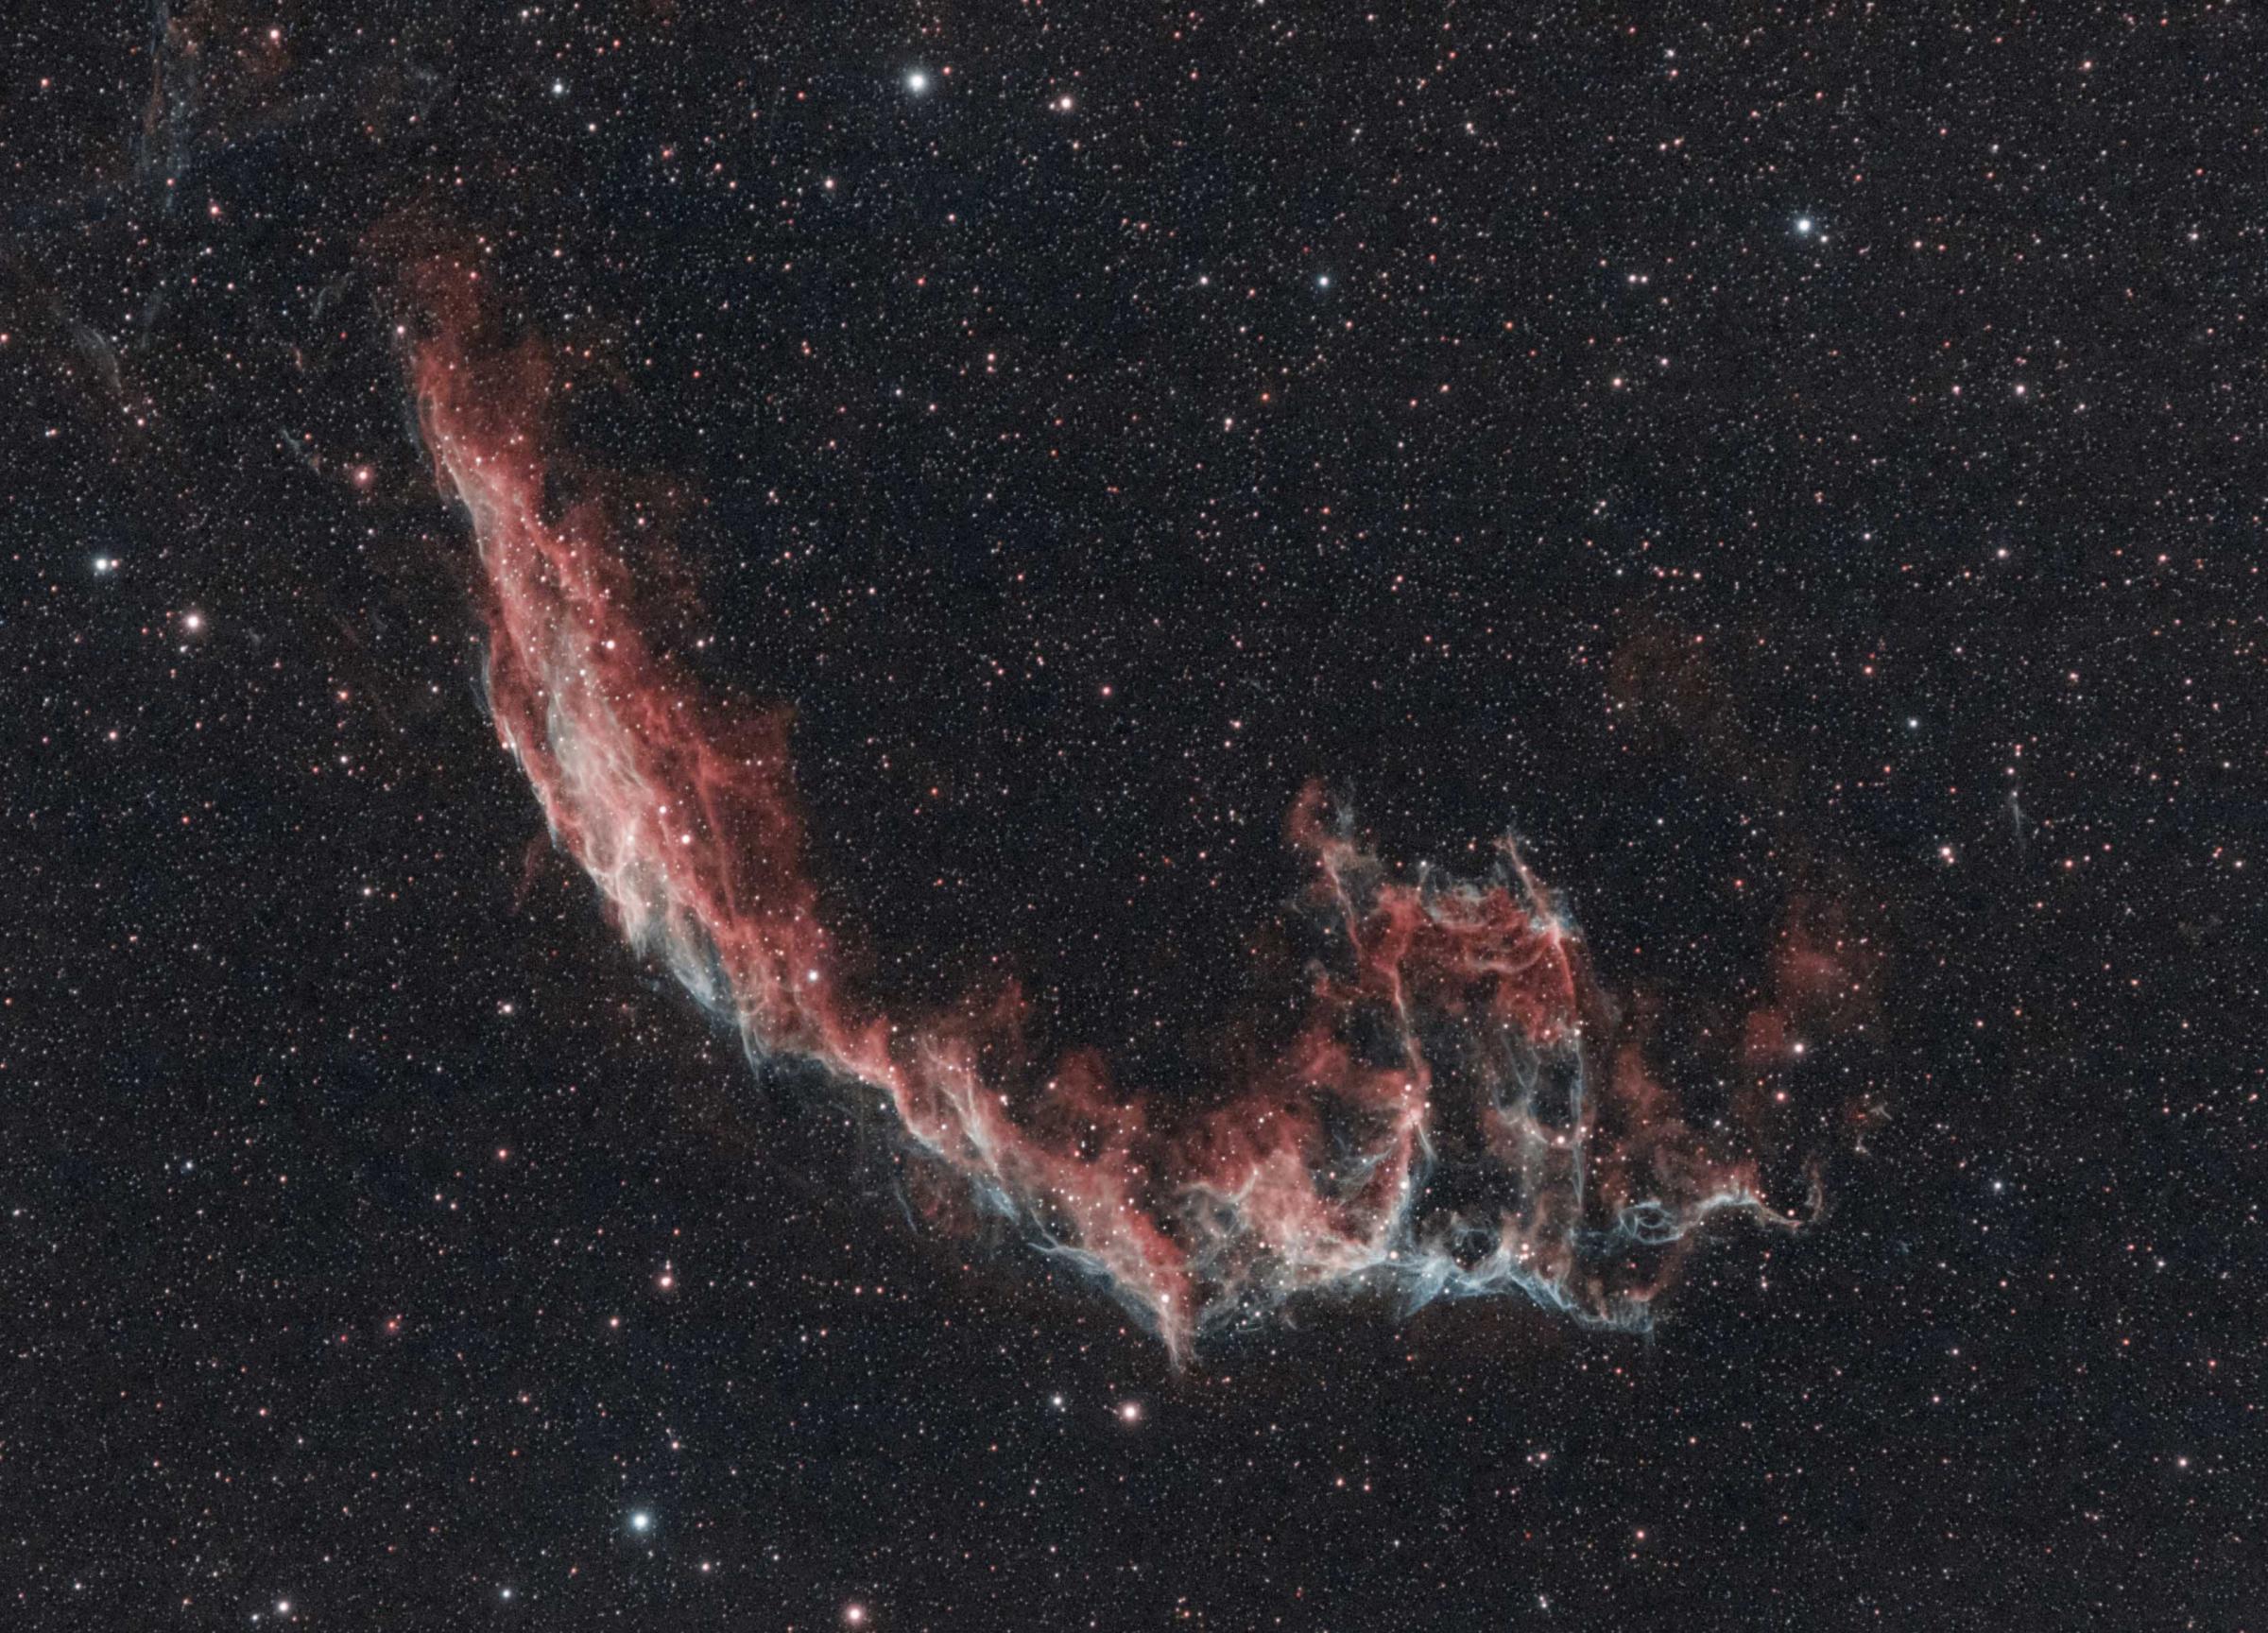 The Veil Nebula, a huge, feathery cloud of heated gas and dust in the constellation Cygnus - pictured by 16-year-old Scottish astro-photographer Helena Cochrane 